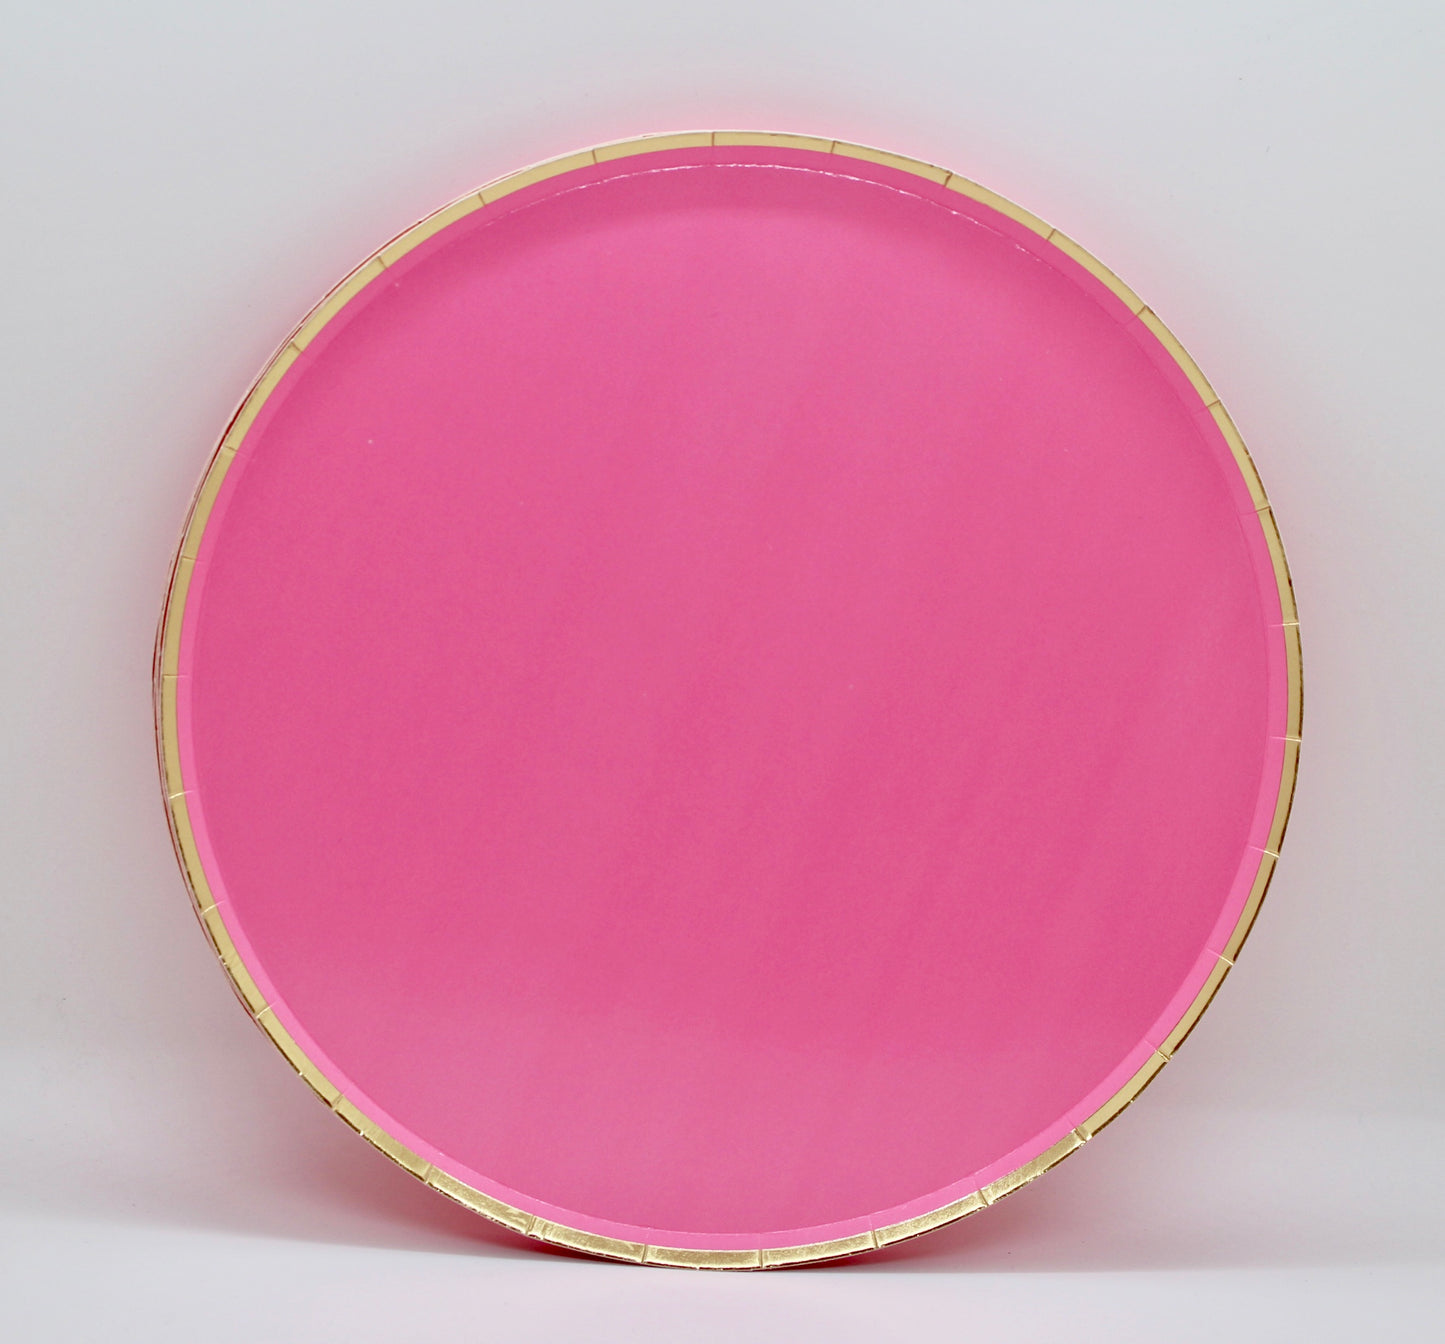 Rose Pink Paper Plate Set - 69 pieces!